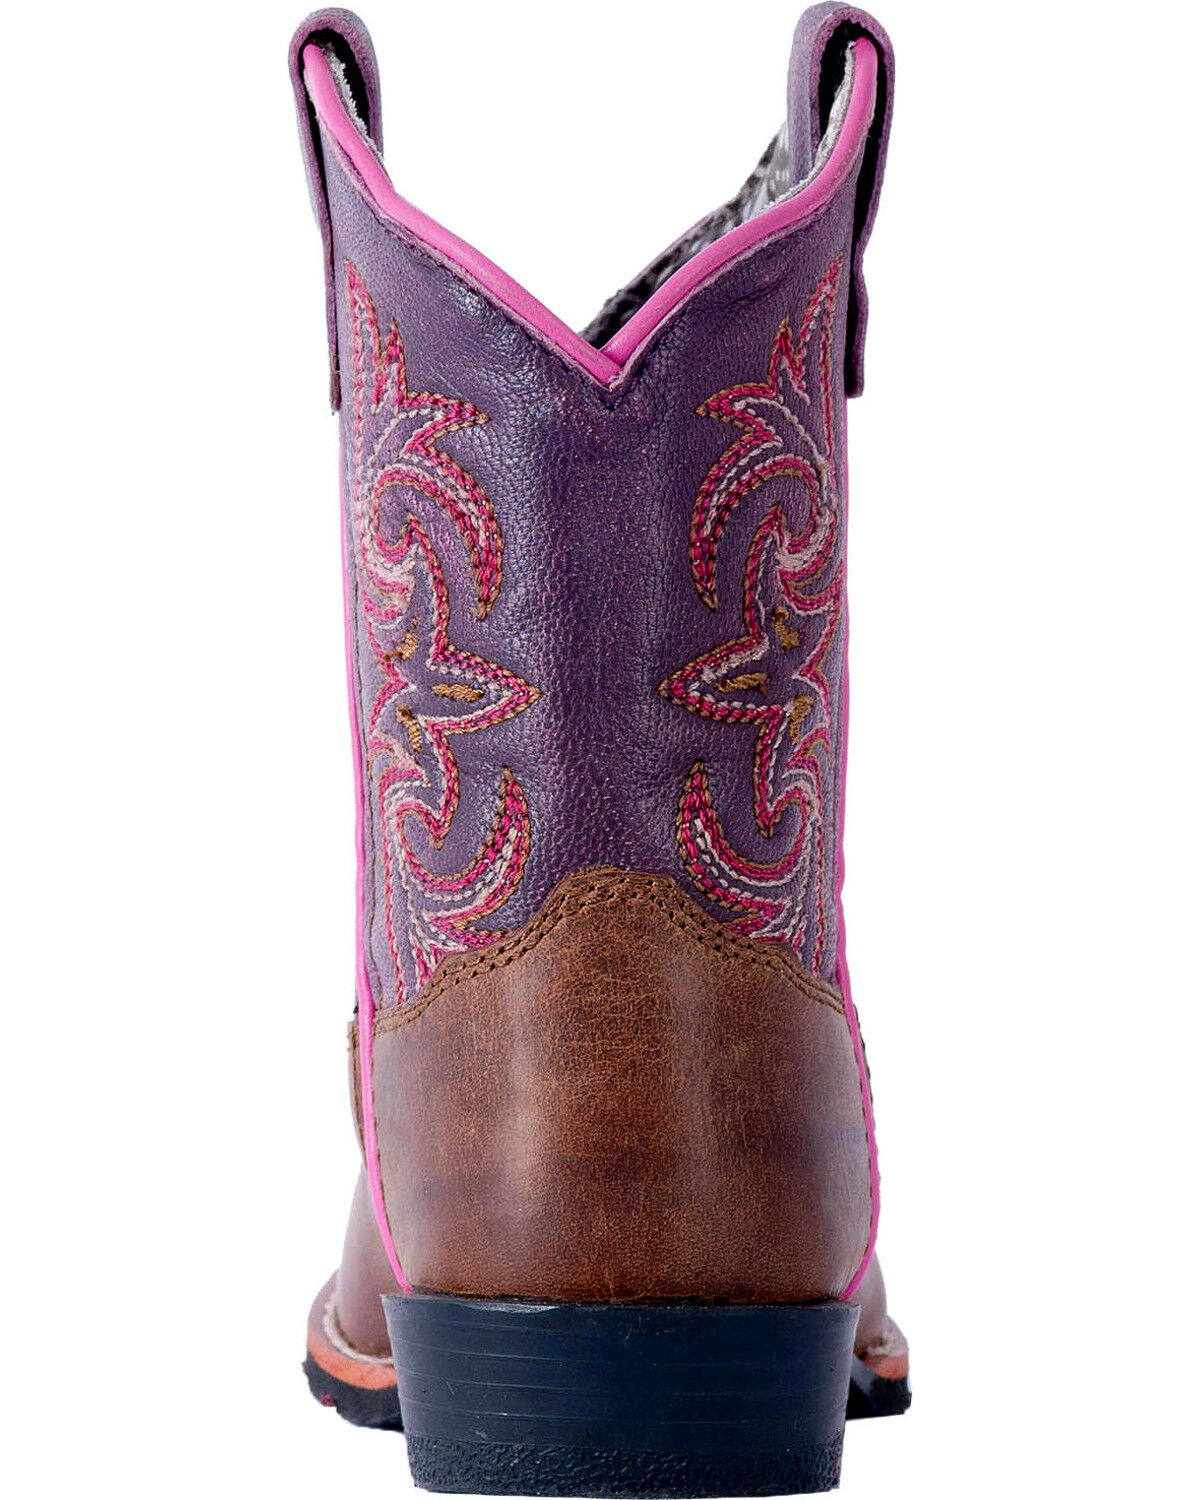 Dan Post Boots Tryke Square Toe    Toddler Girls  Western Cowboy Dress Boots 